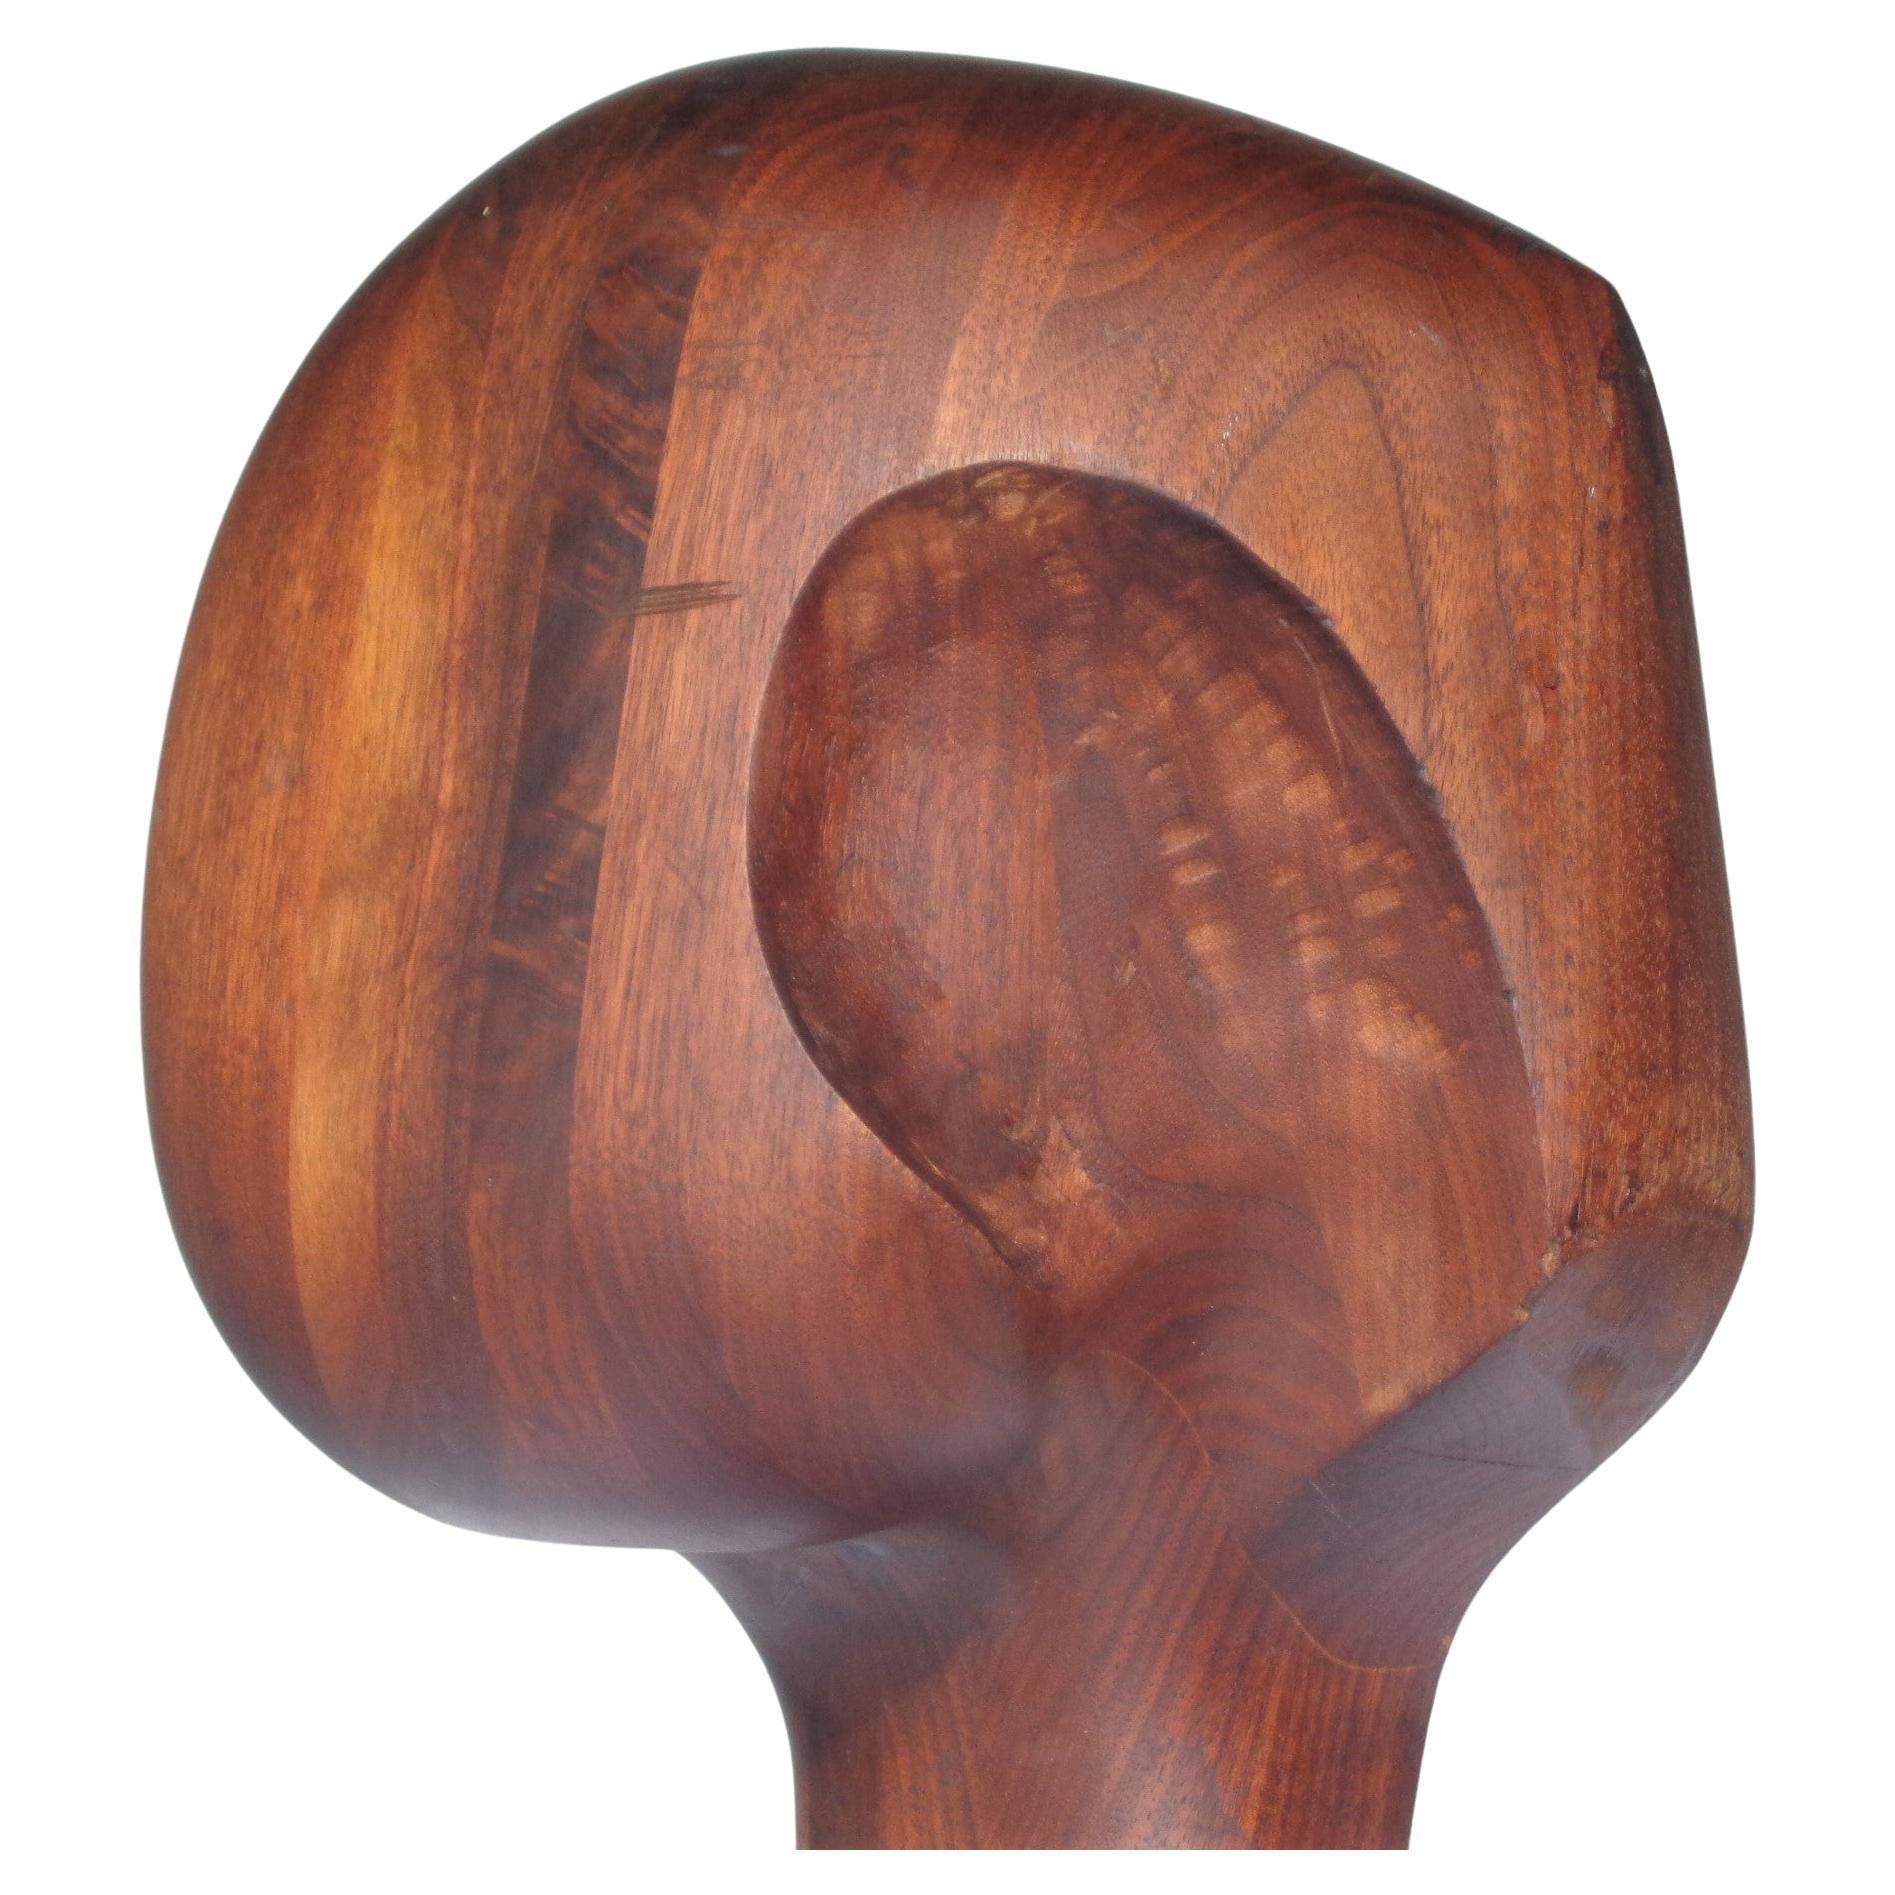 American Studio Craft Movement Abstract Sculpture Wood Bust, 1970-1980 For Sale 9